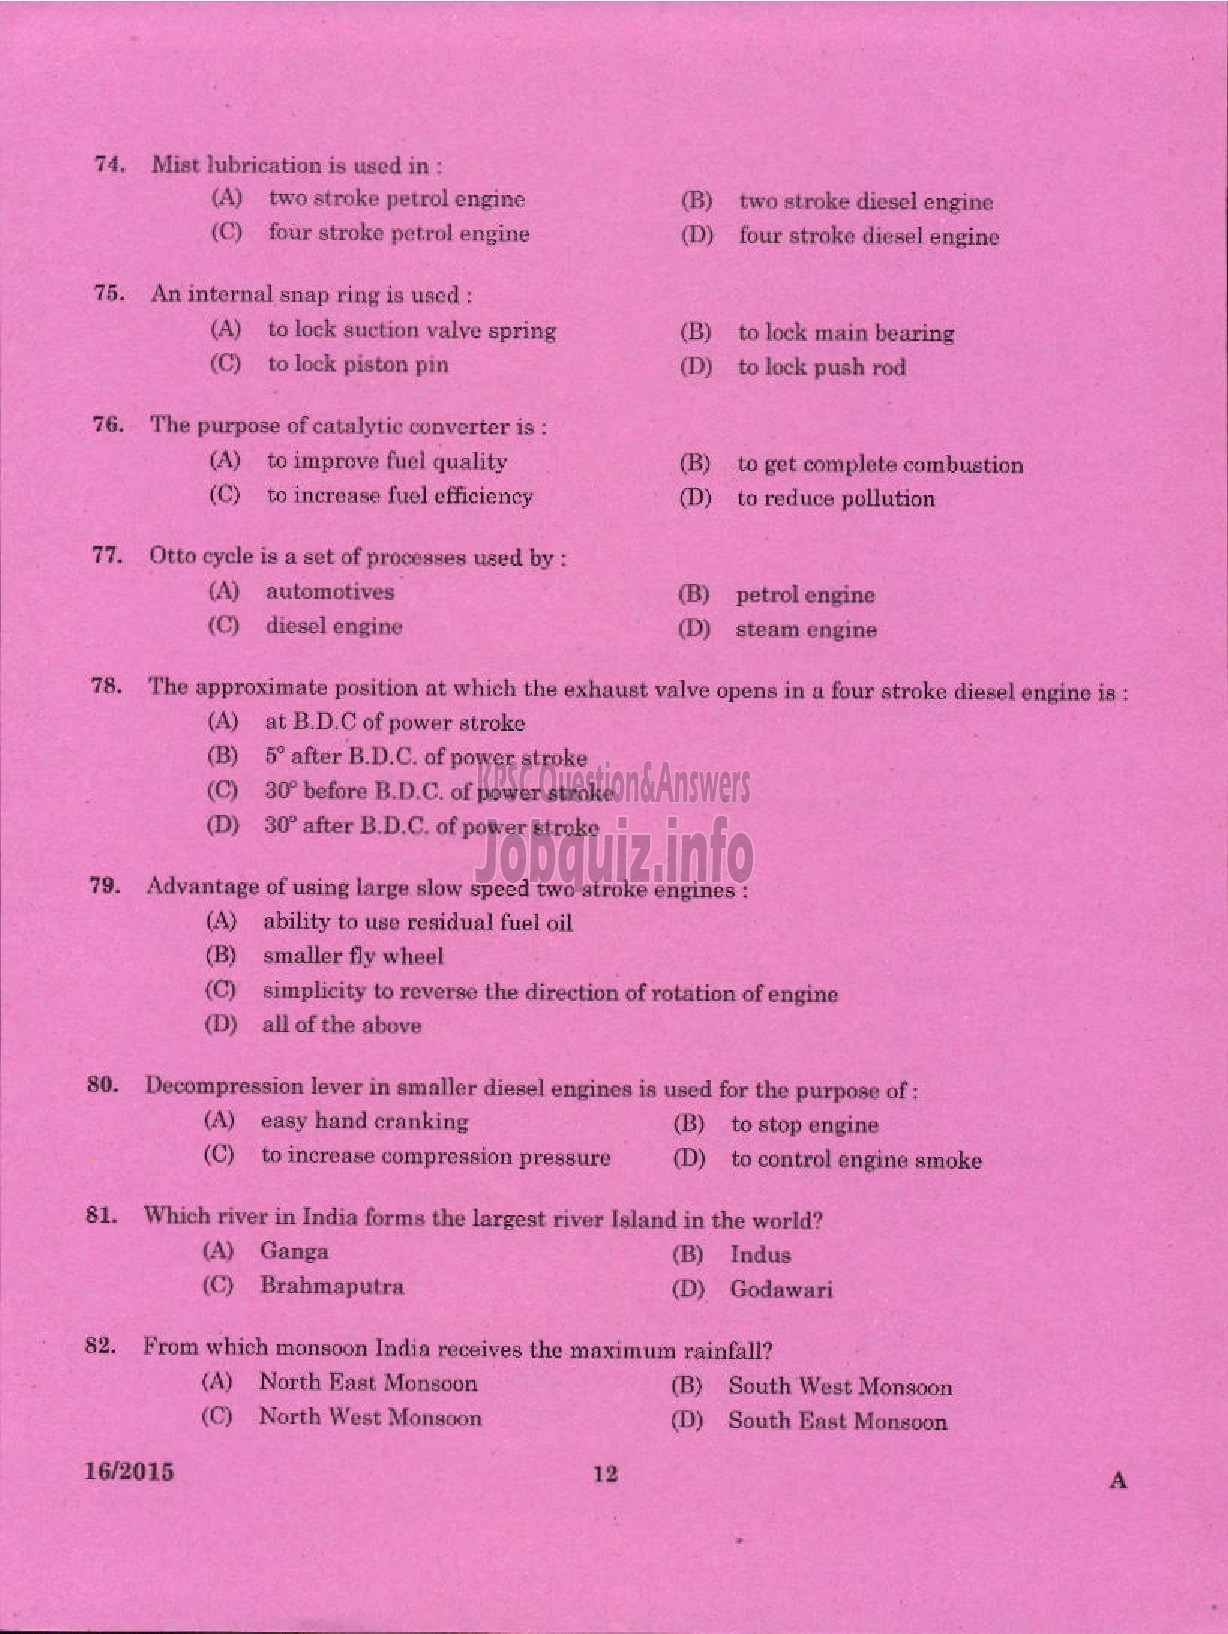 Kerala PSC Question Paper - LABORATORY TECHNICAL ASSISTANT MAINTENANCE AND OPERATION OF MARINE ENGINES VHSE-10